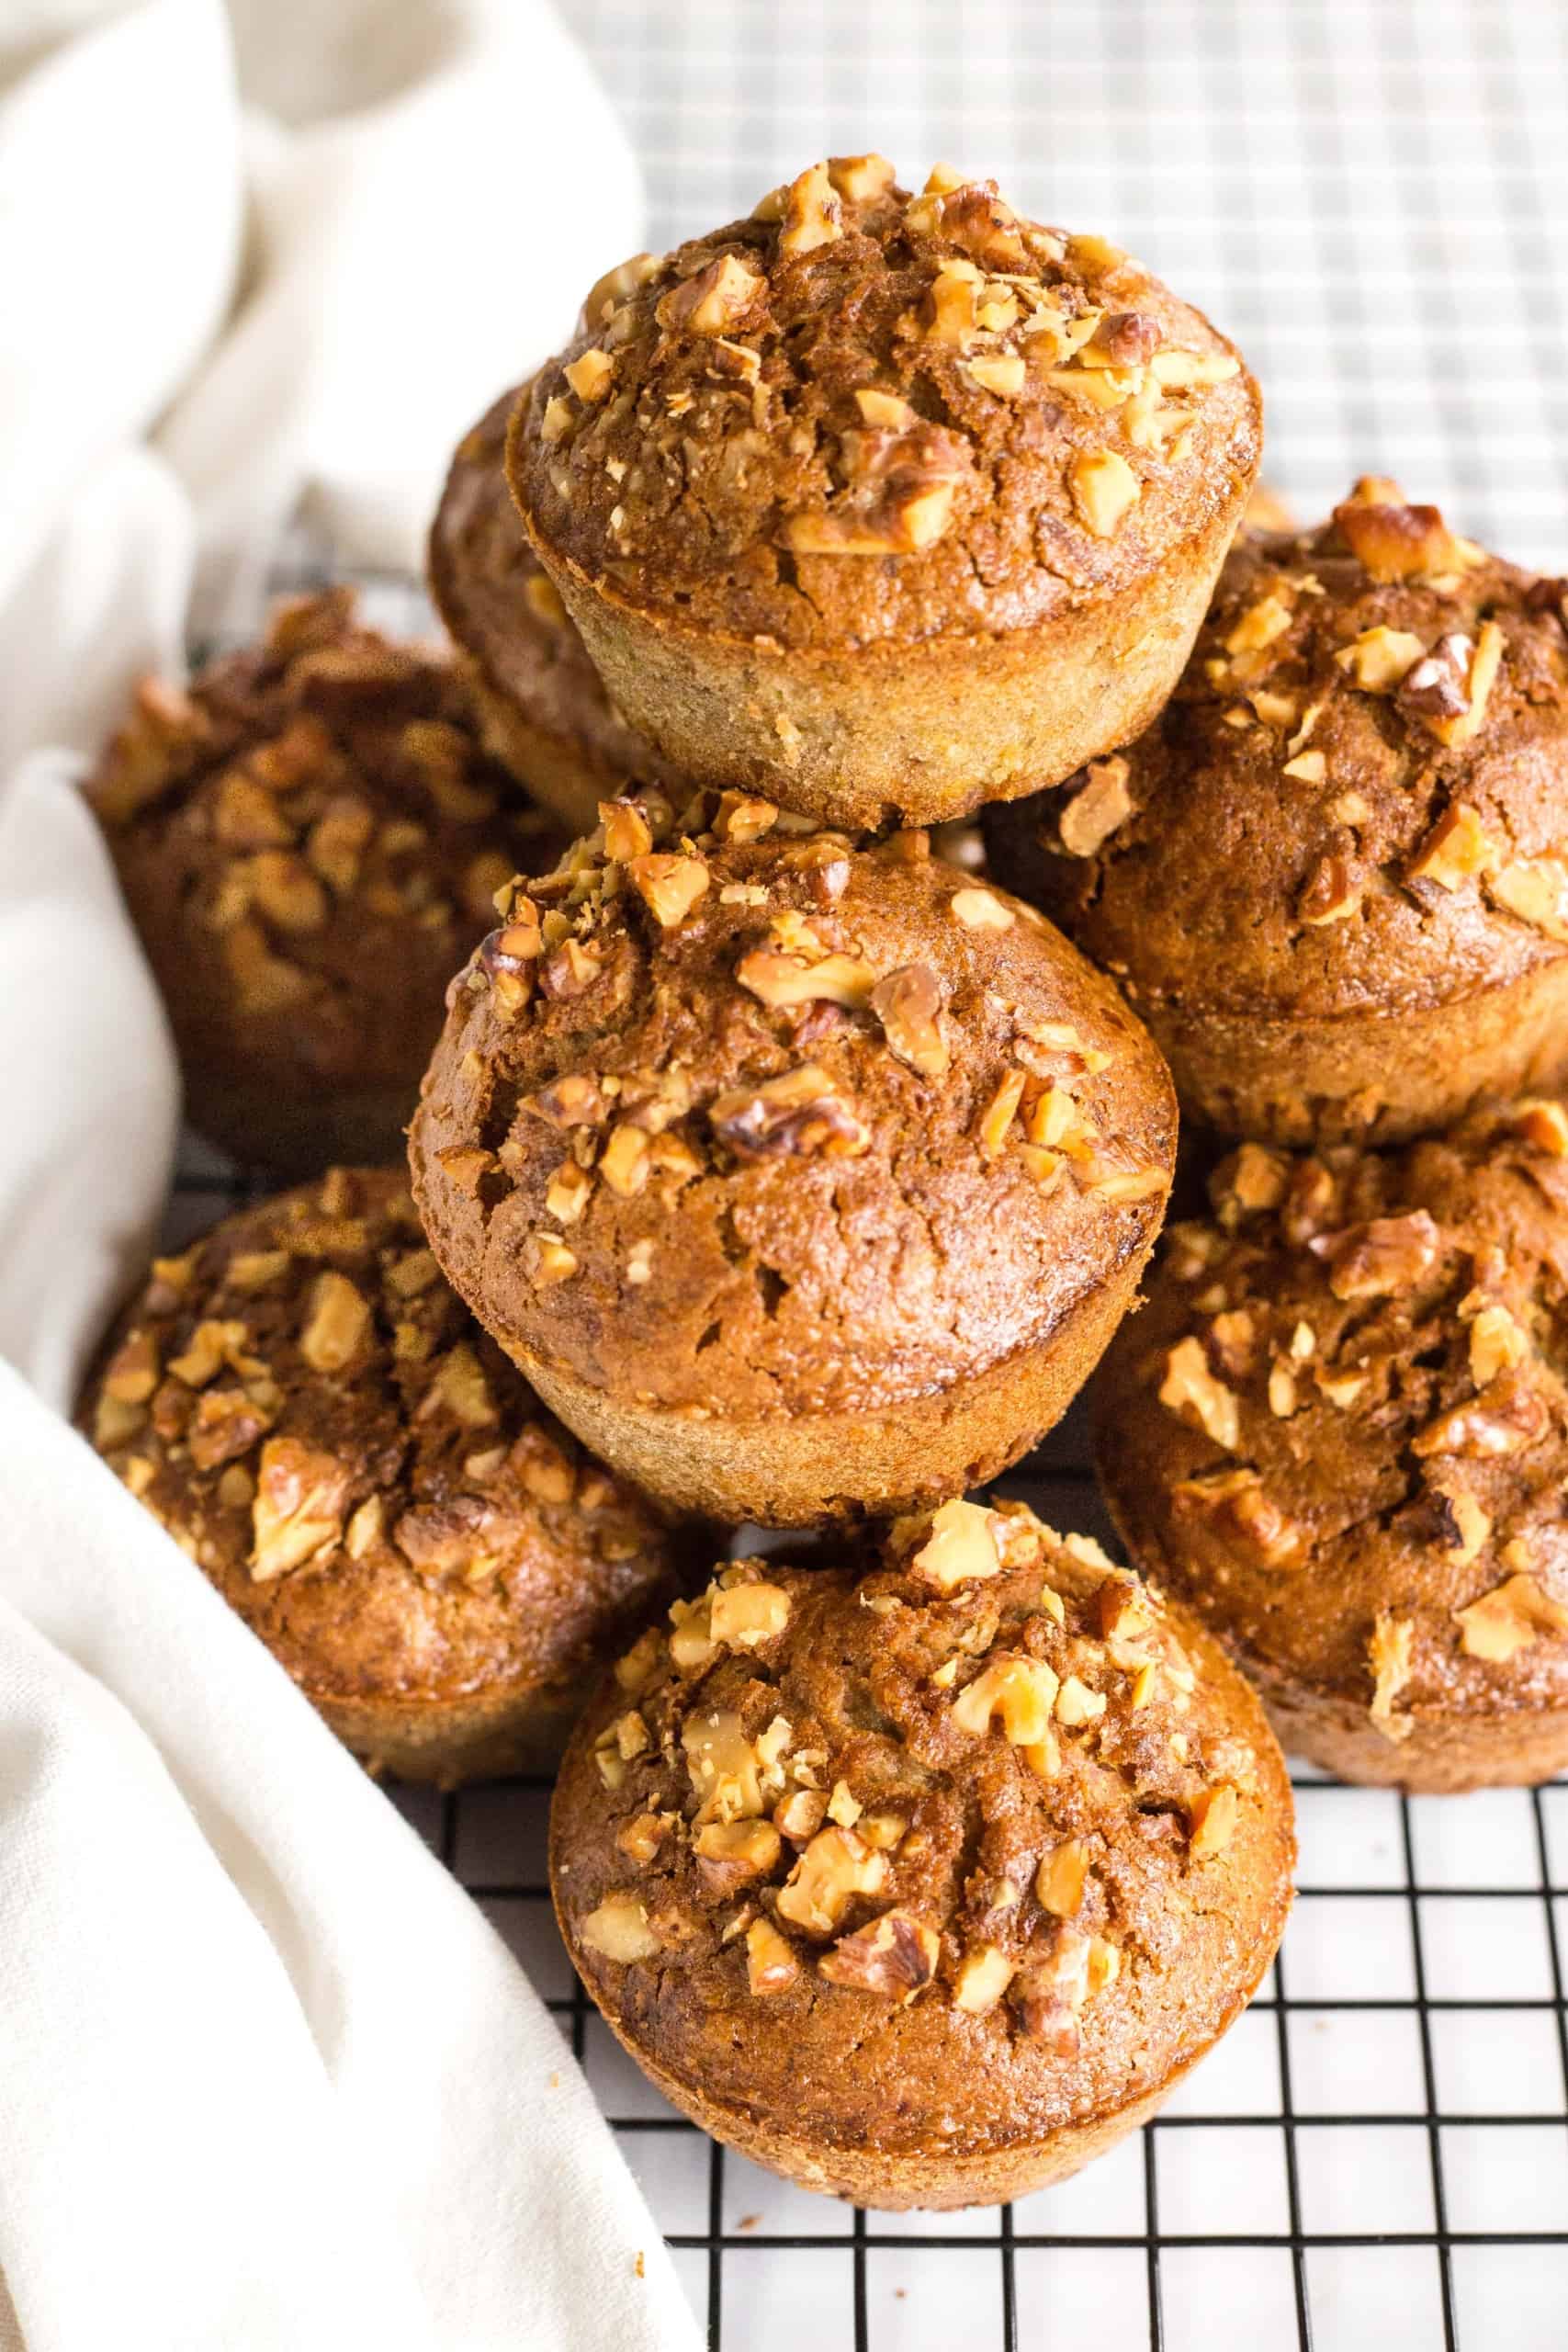 A stack of walnut-studded gluten-free muffins on wire rack.